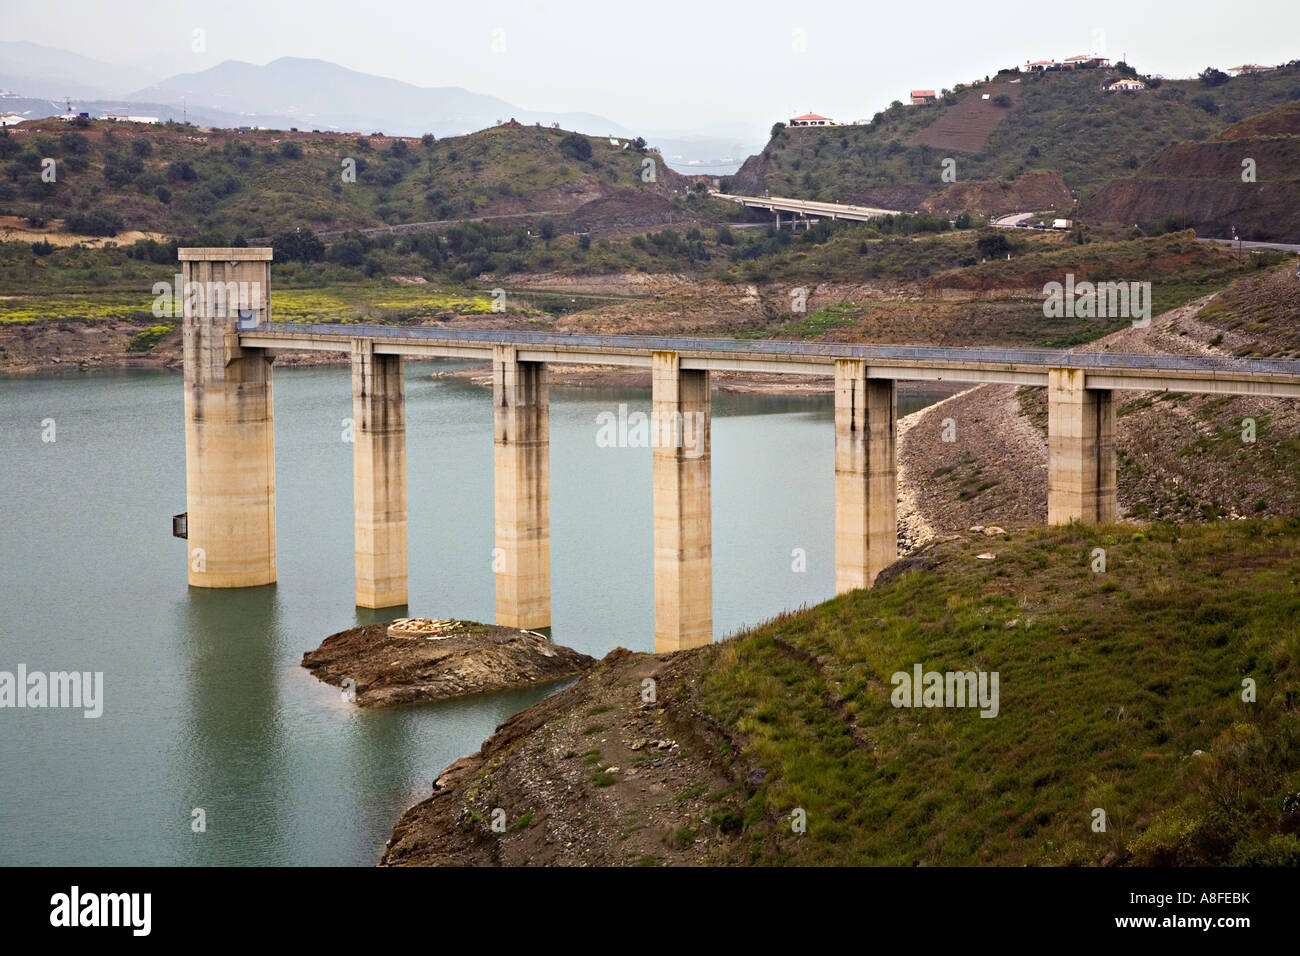 Valve tower at dam for reservoir with low water level Vinuela Andalucia Spain Stock Photo